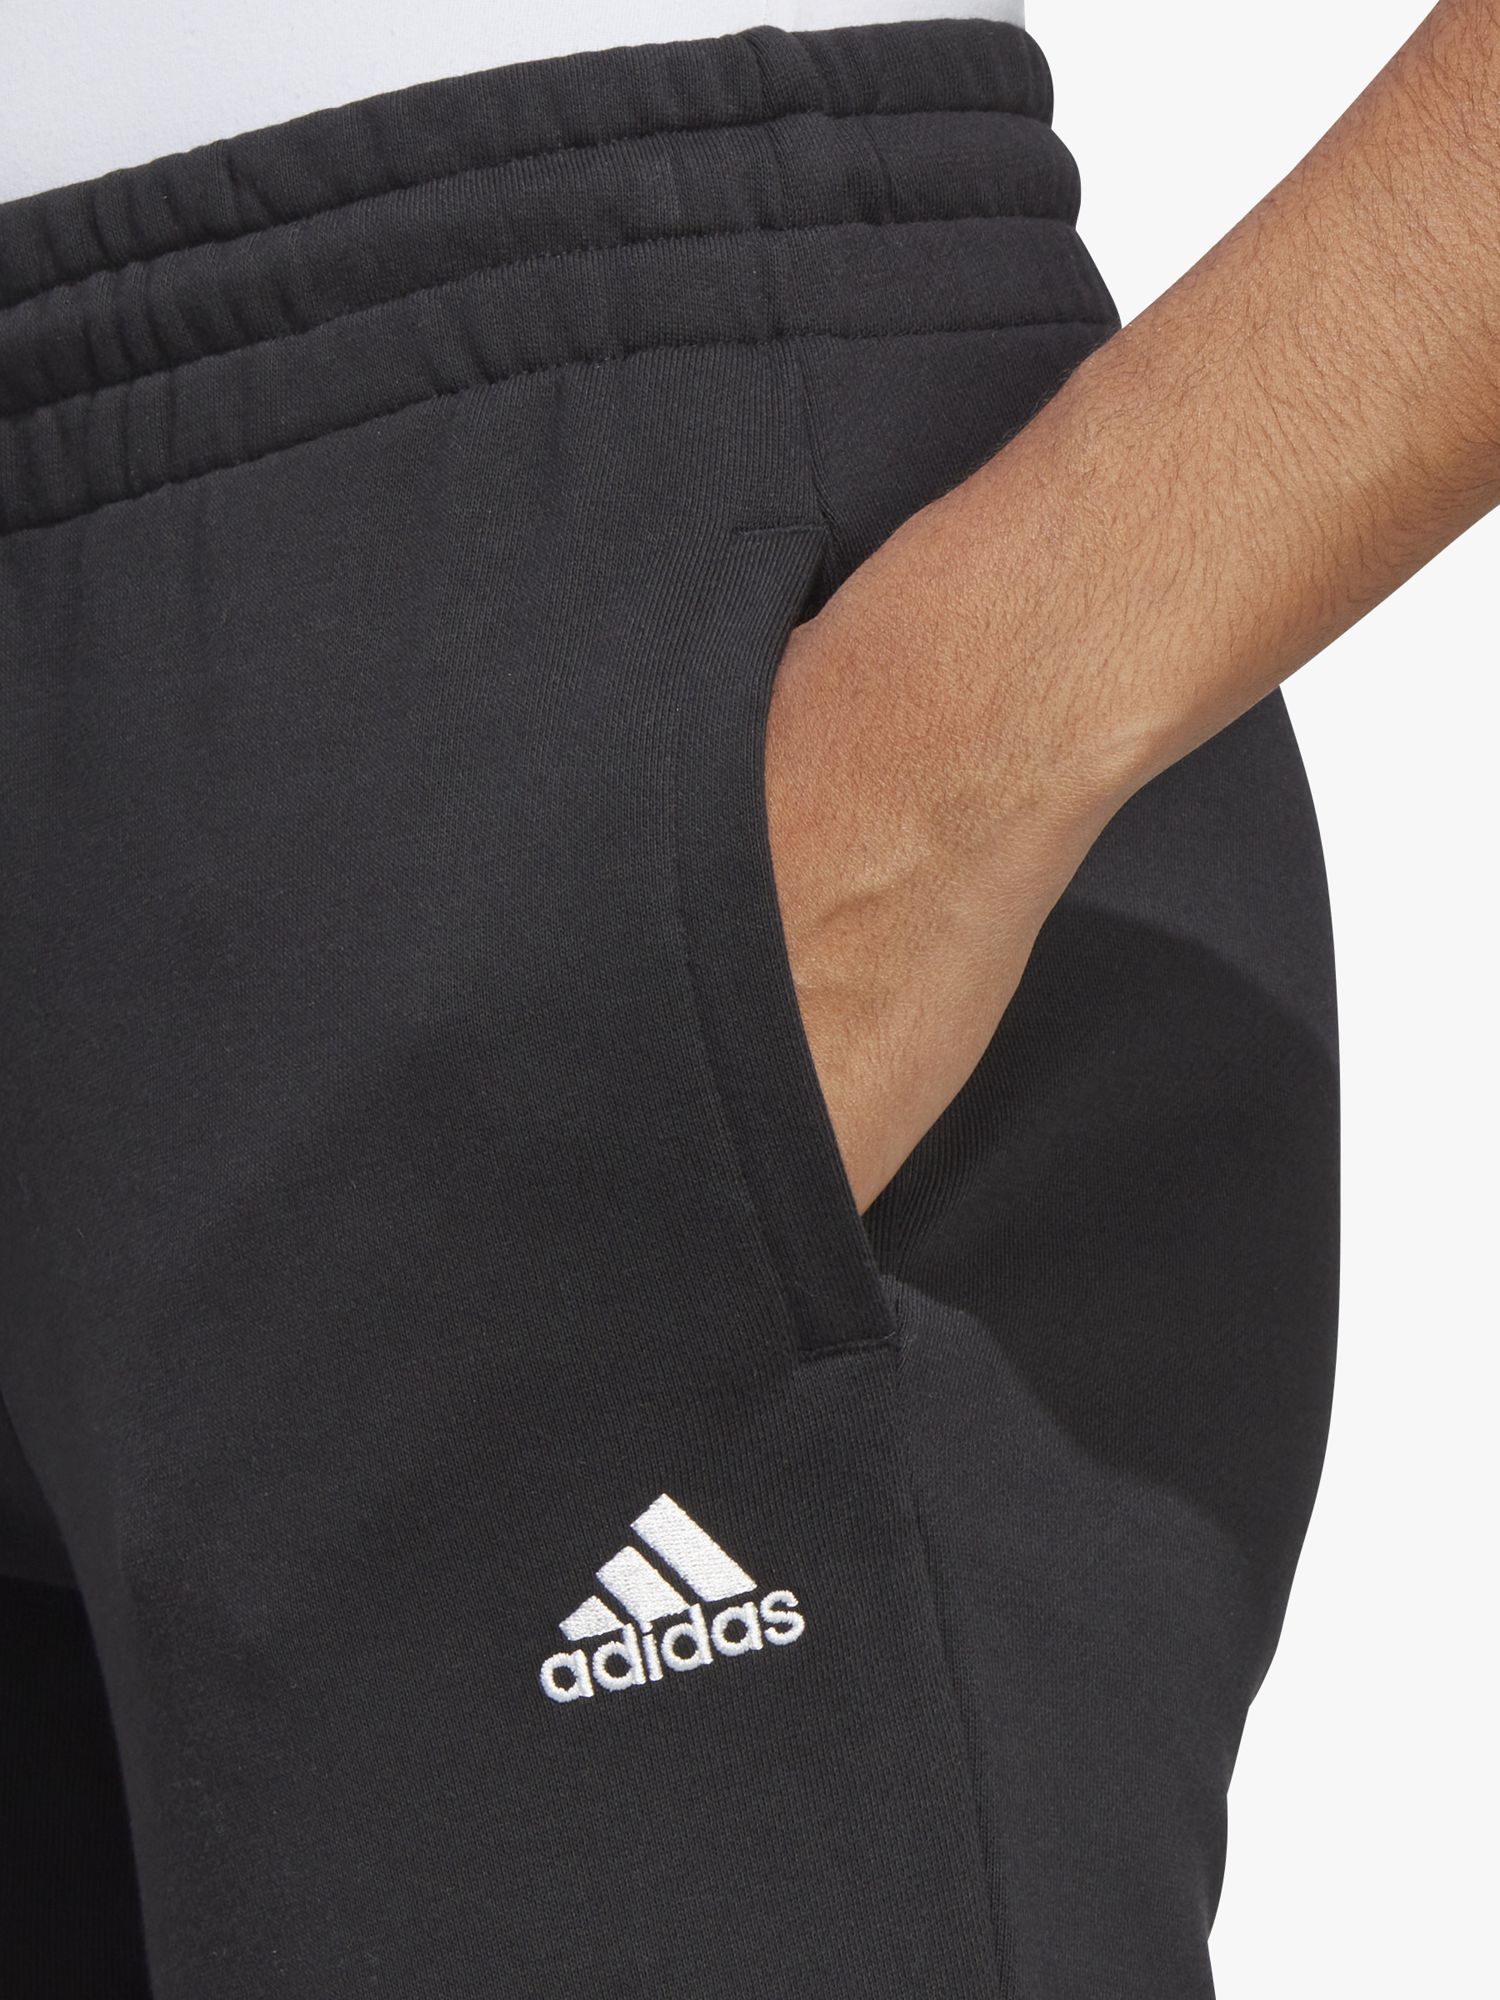 Buy adidas Essentials Linear French Terry Cuffed Training Pants